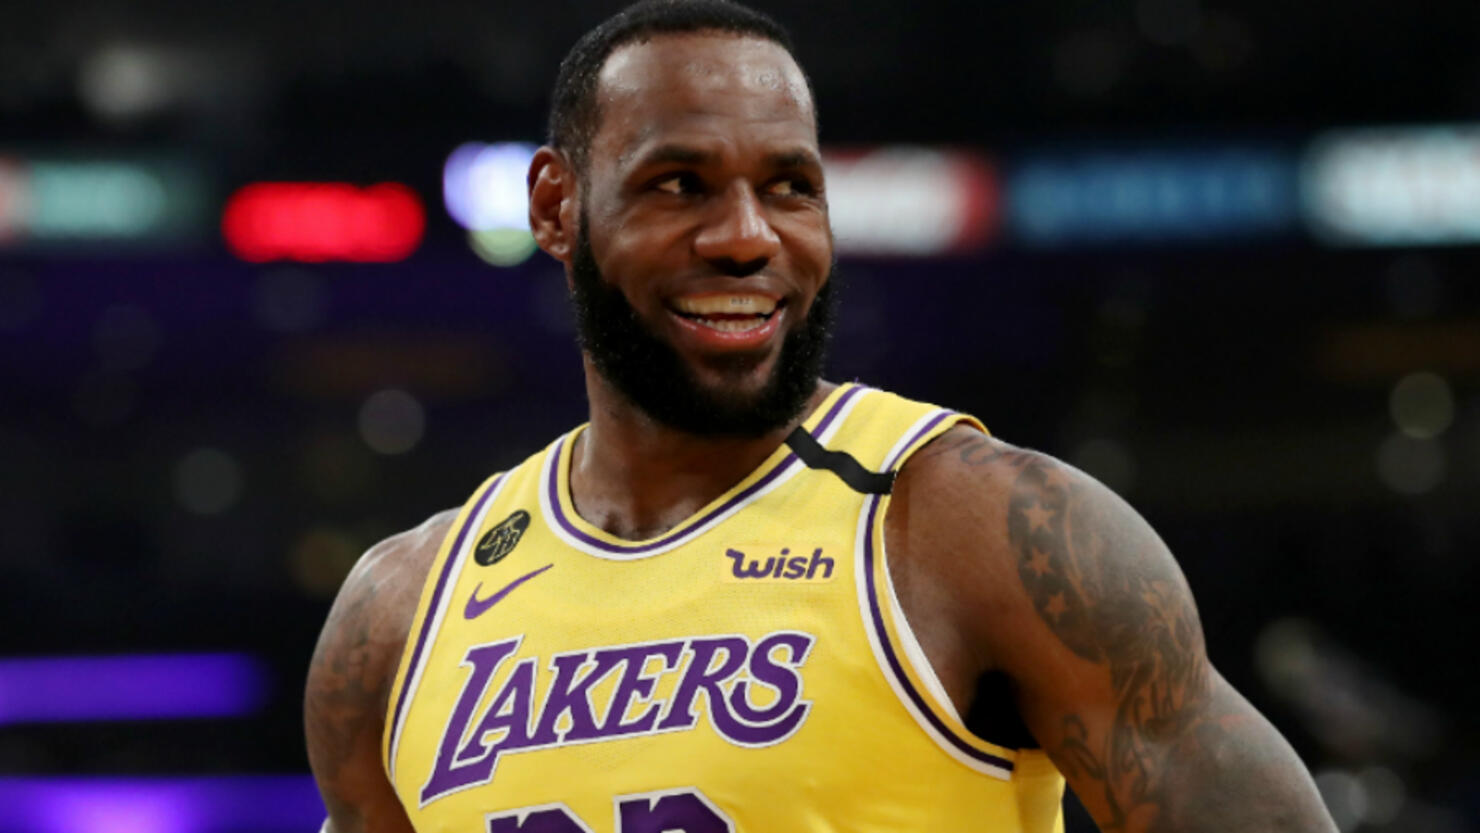 LeBron James and Other Stars Form a Voting Rights Group - The New